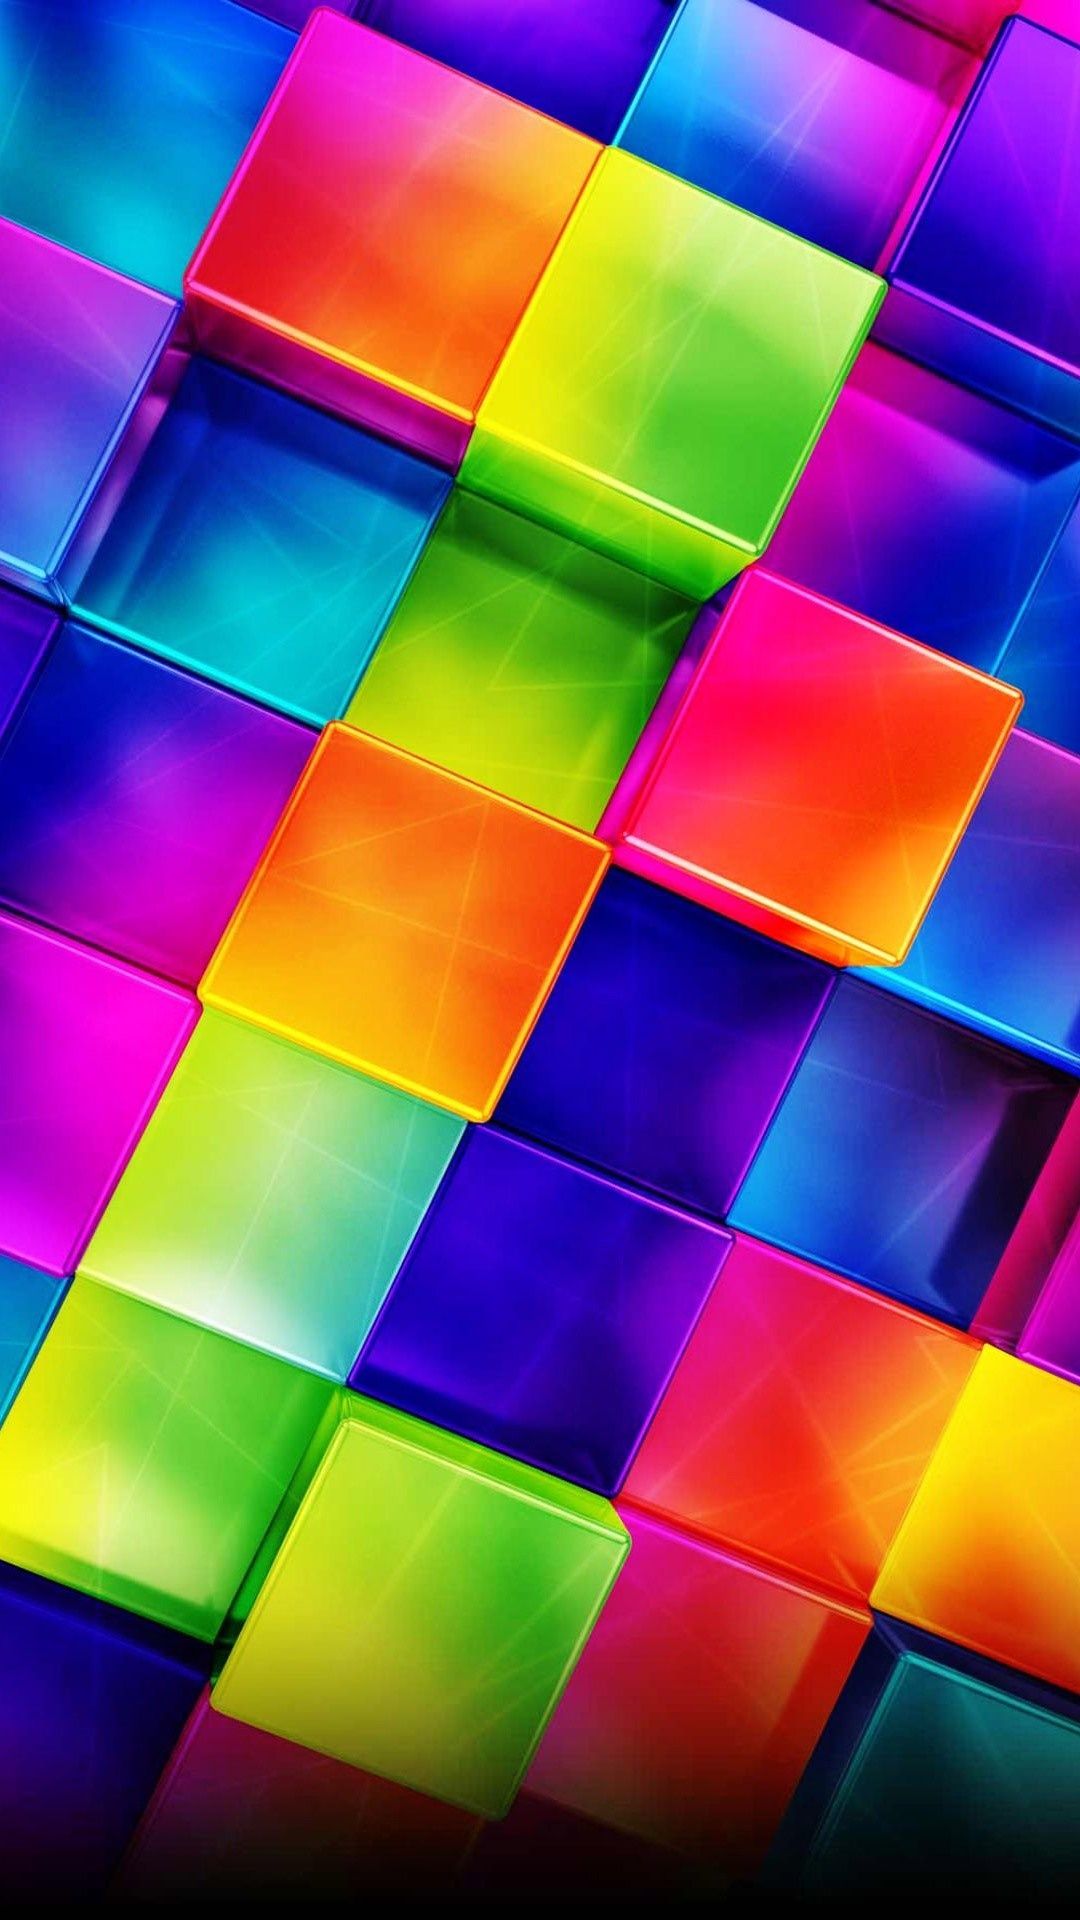 3D Geometric Colorful Android Wallpaper Wallpaper Android